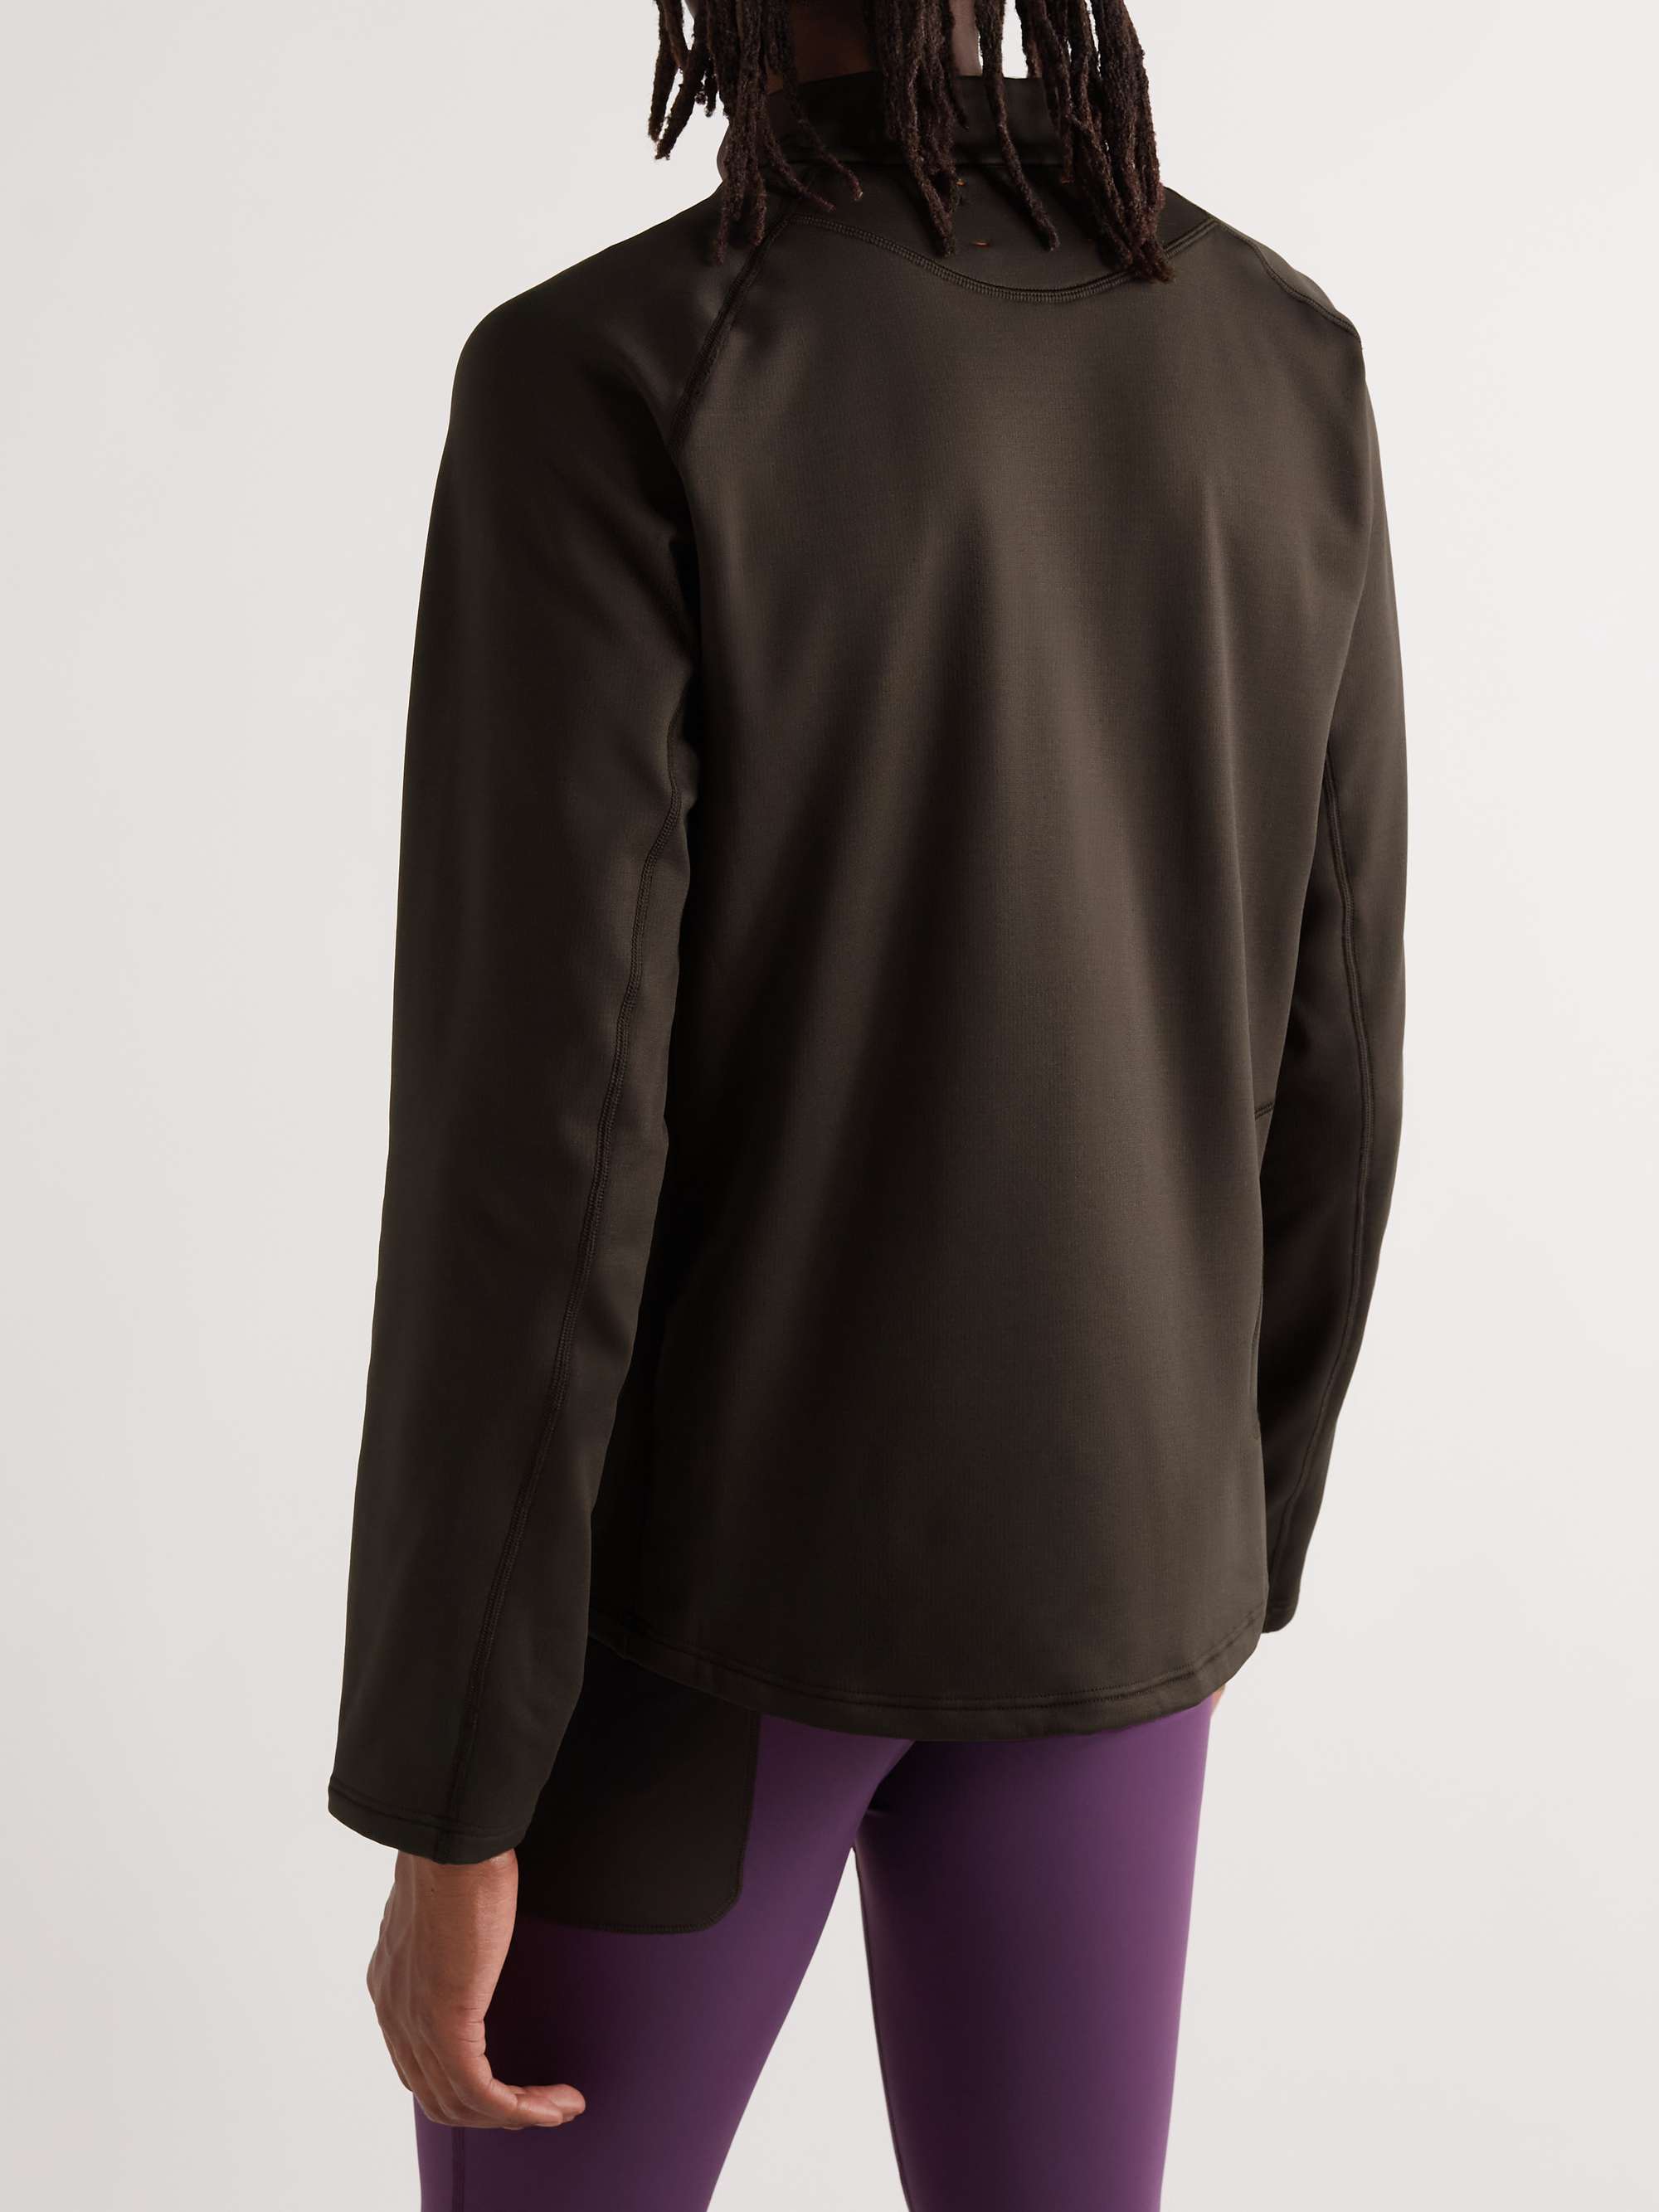 DISTRICT VISION Luca Shell-Trimmed Recycled Jersey Half-Zip Running Top